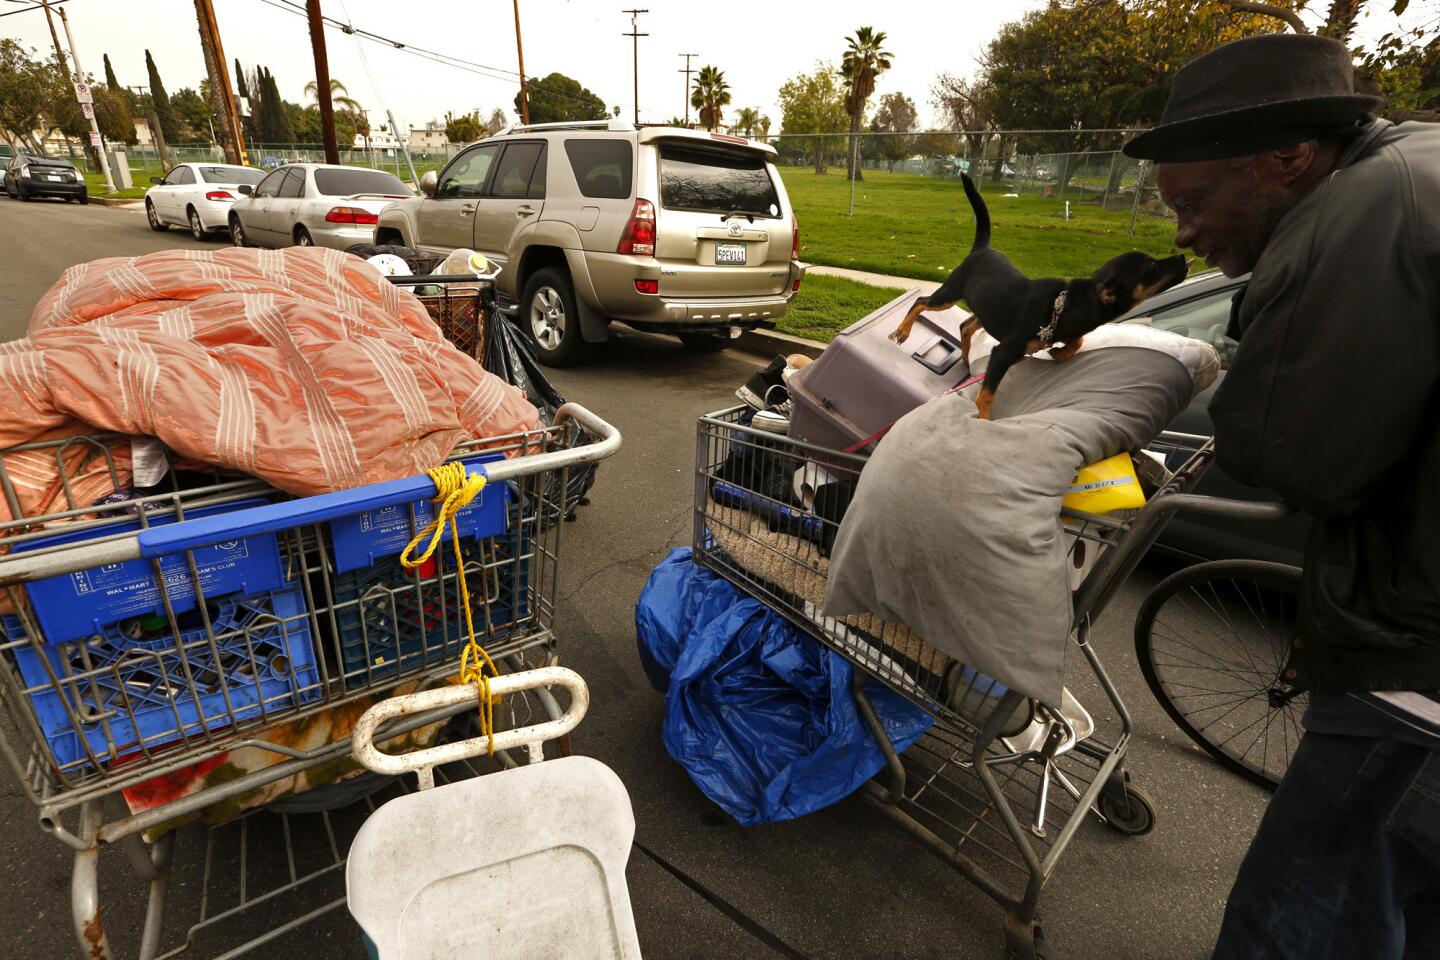 Ricky Riller, 59, gets a lick from his dog Roxanne while moving his belongings in shopping carts before sanitation workers sweep the homeless encampments in the Manchester Square neighborhood in Los Angeles.